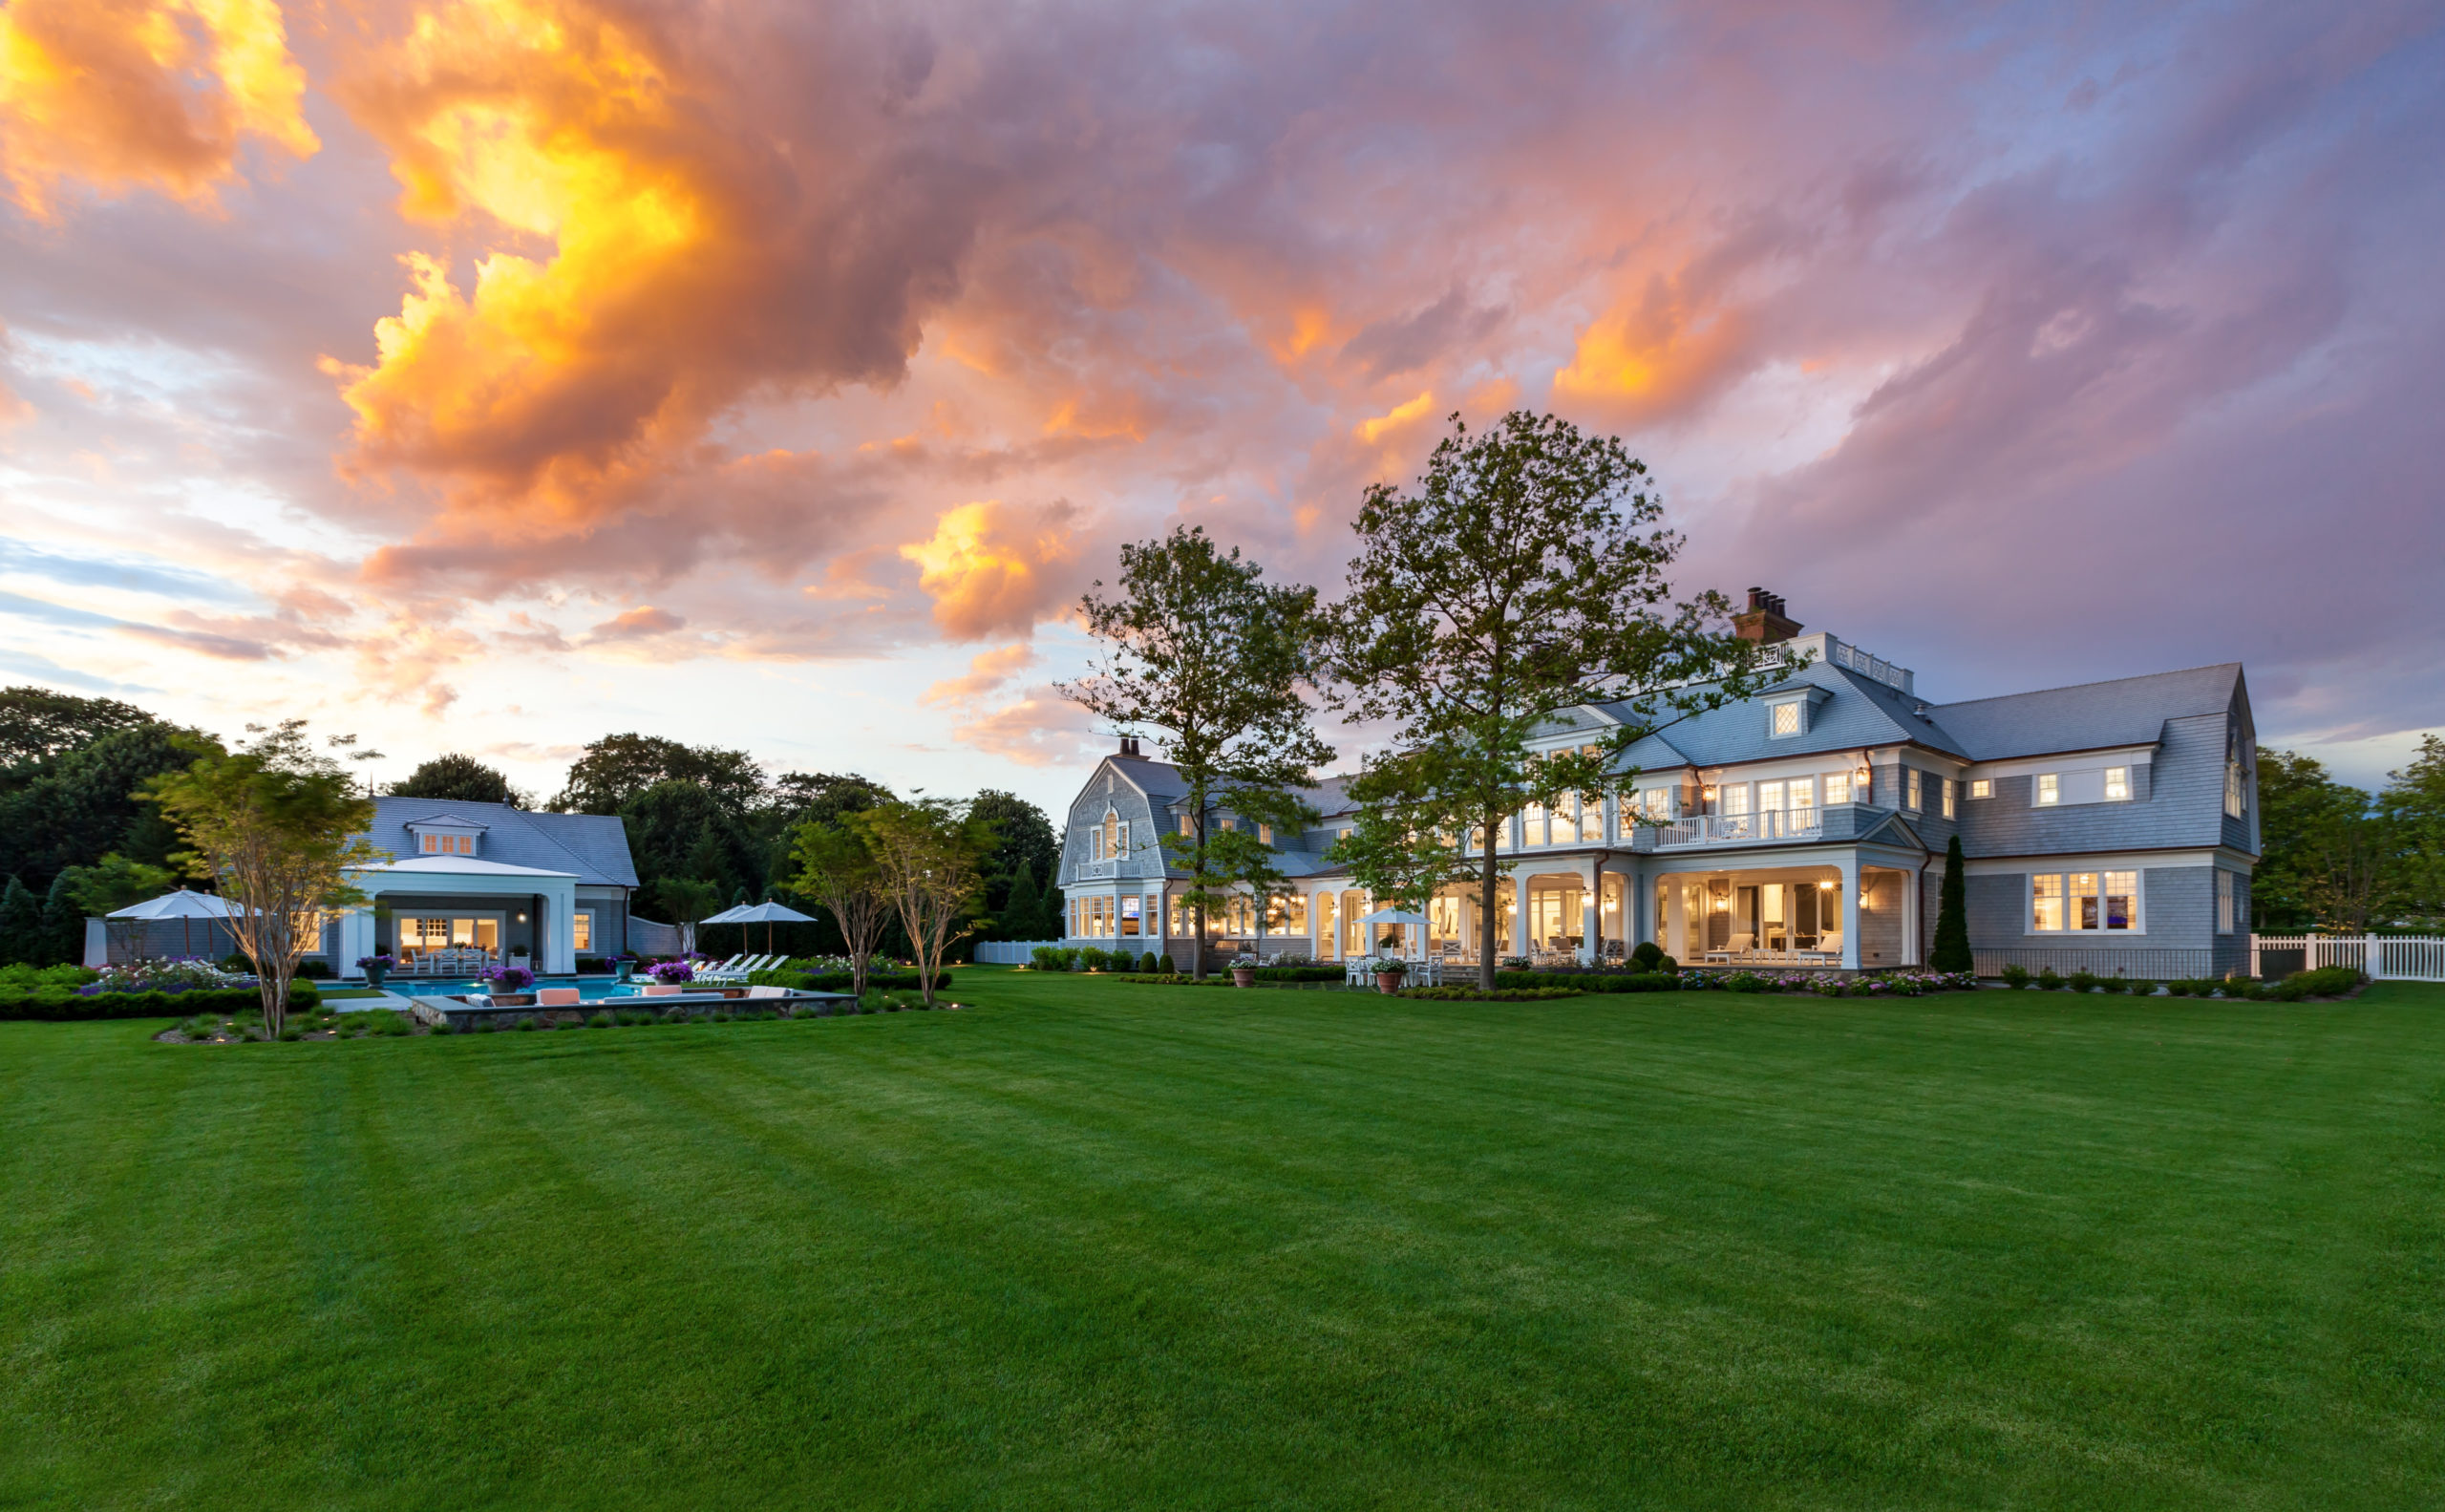 6 Olde Towne Lane, Southampton. the No. 5 Hamptons home sale of 2019.  KIM SARGENT/COURTESY THE CORCORAN GROUP